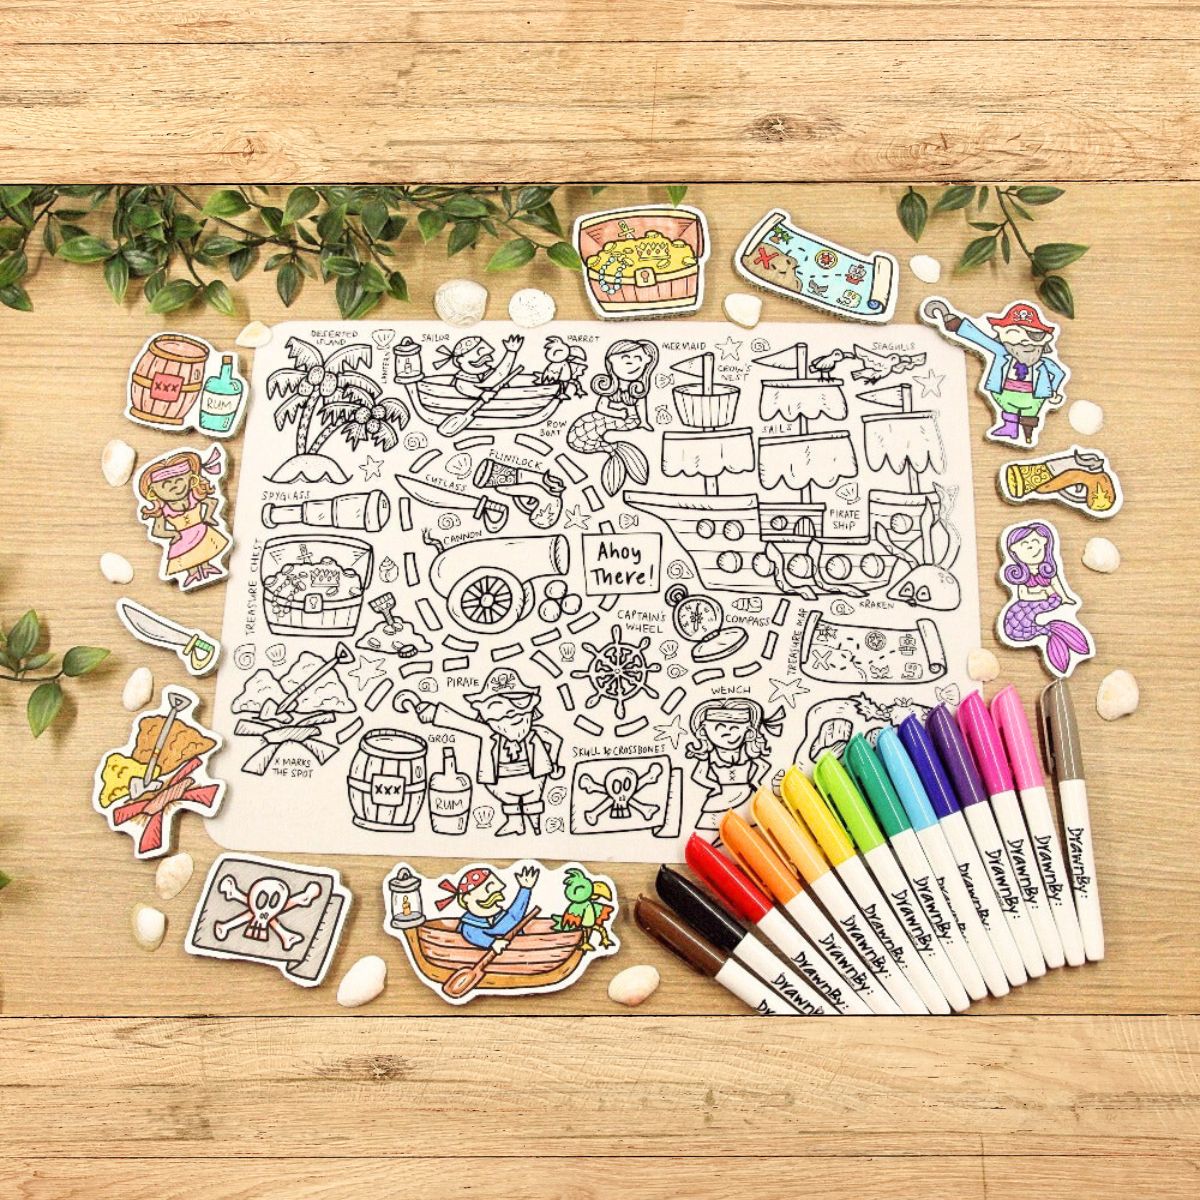 [Drawnby:] Ahoy There Washable Silicone Colouring Mat + 14pcs Markers Set